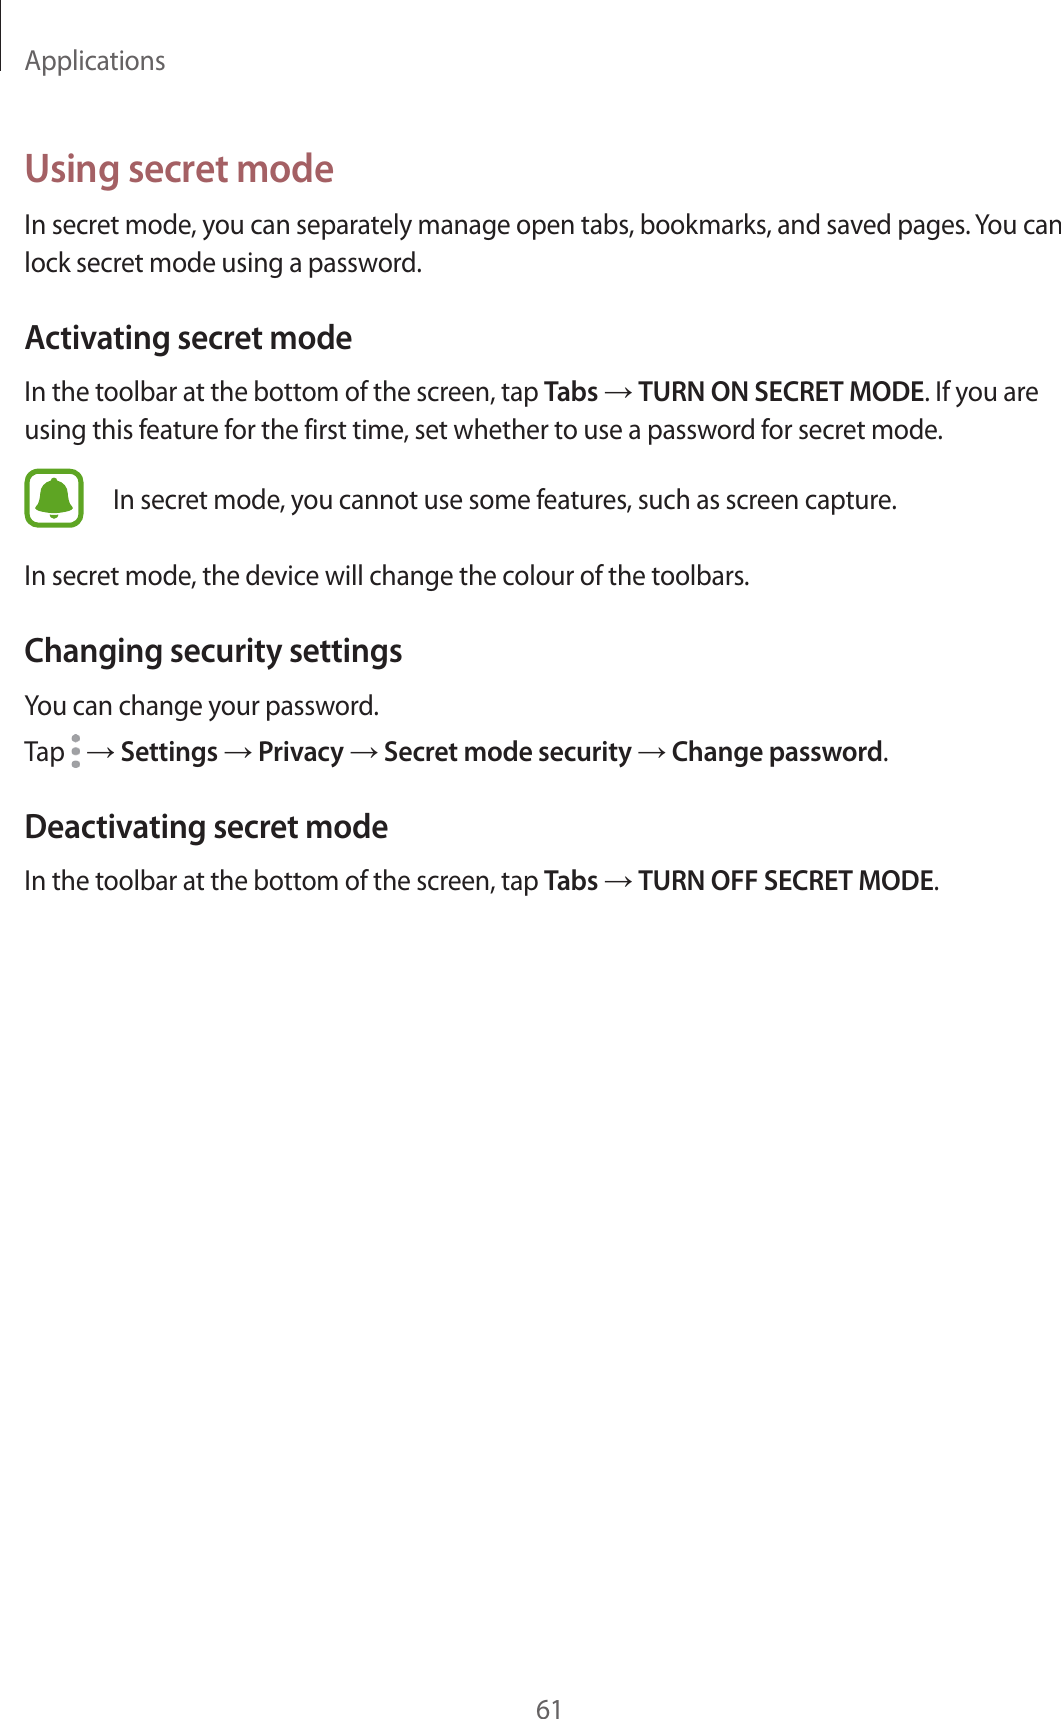 Applications61Using secret modeIn secret mode, you can separately manage open tabs, bookmarks, and saved pages. You can lock secret mode using a password.Activating secret modeIn the toolbar at the bottom of the screen, tap Tabs → TURN ON SECRET MODE. If you are using this feature for the first time, set whether to use a password for secret mode.In secret mode, you cannot use some features, such as screen capture.In secret mode, the device will change the colour of the toolbars.Changing security settingsYou can change your password.Tap   → Settings → Privacy → Secret mode security → Change password.Deactivating secret modeIn the toolbar at the bottom of the screen, tap Tabs → TURN OFF SECRET MODE.